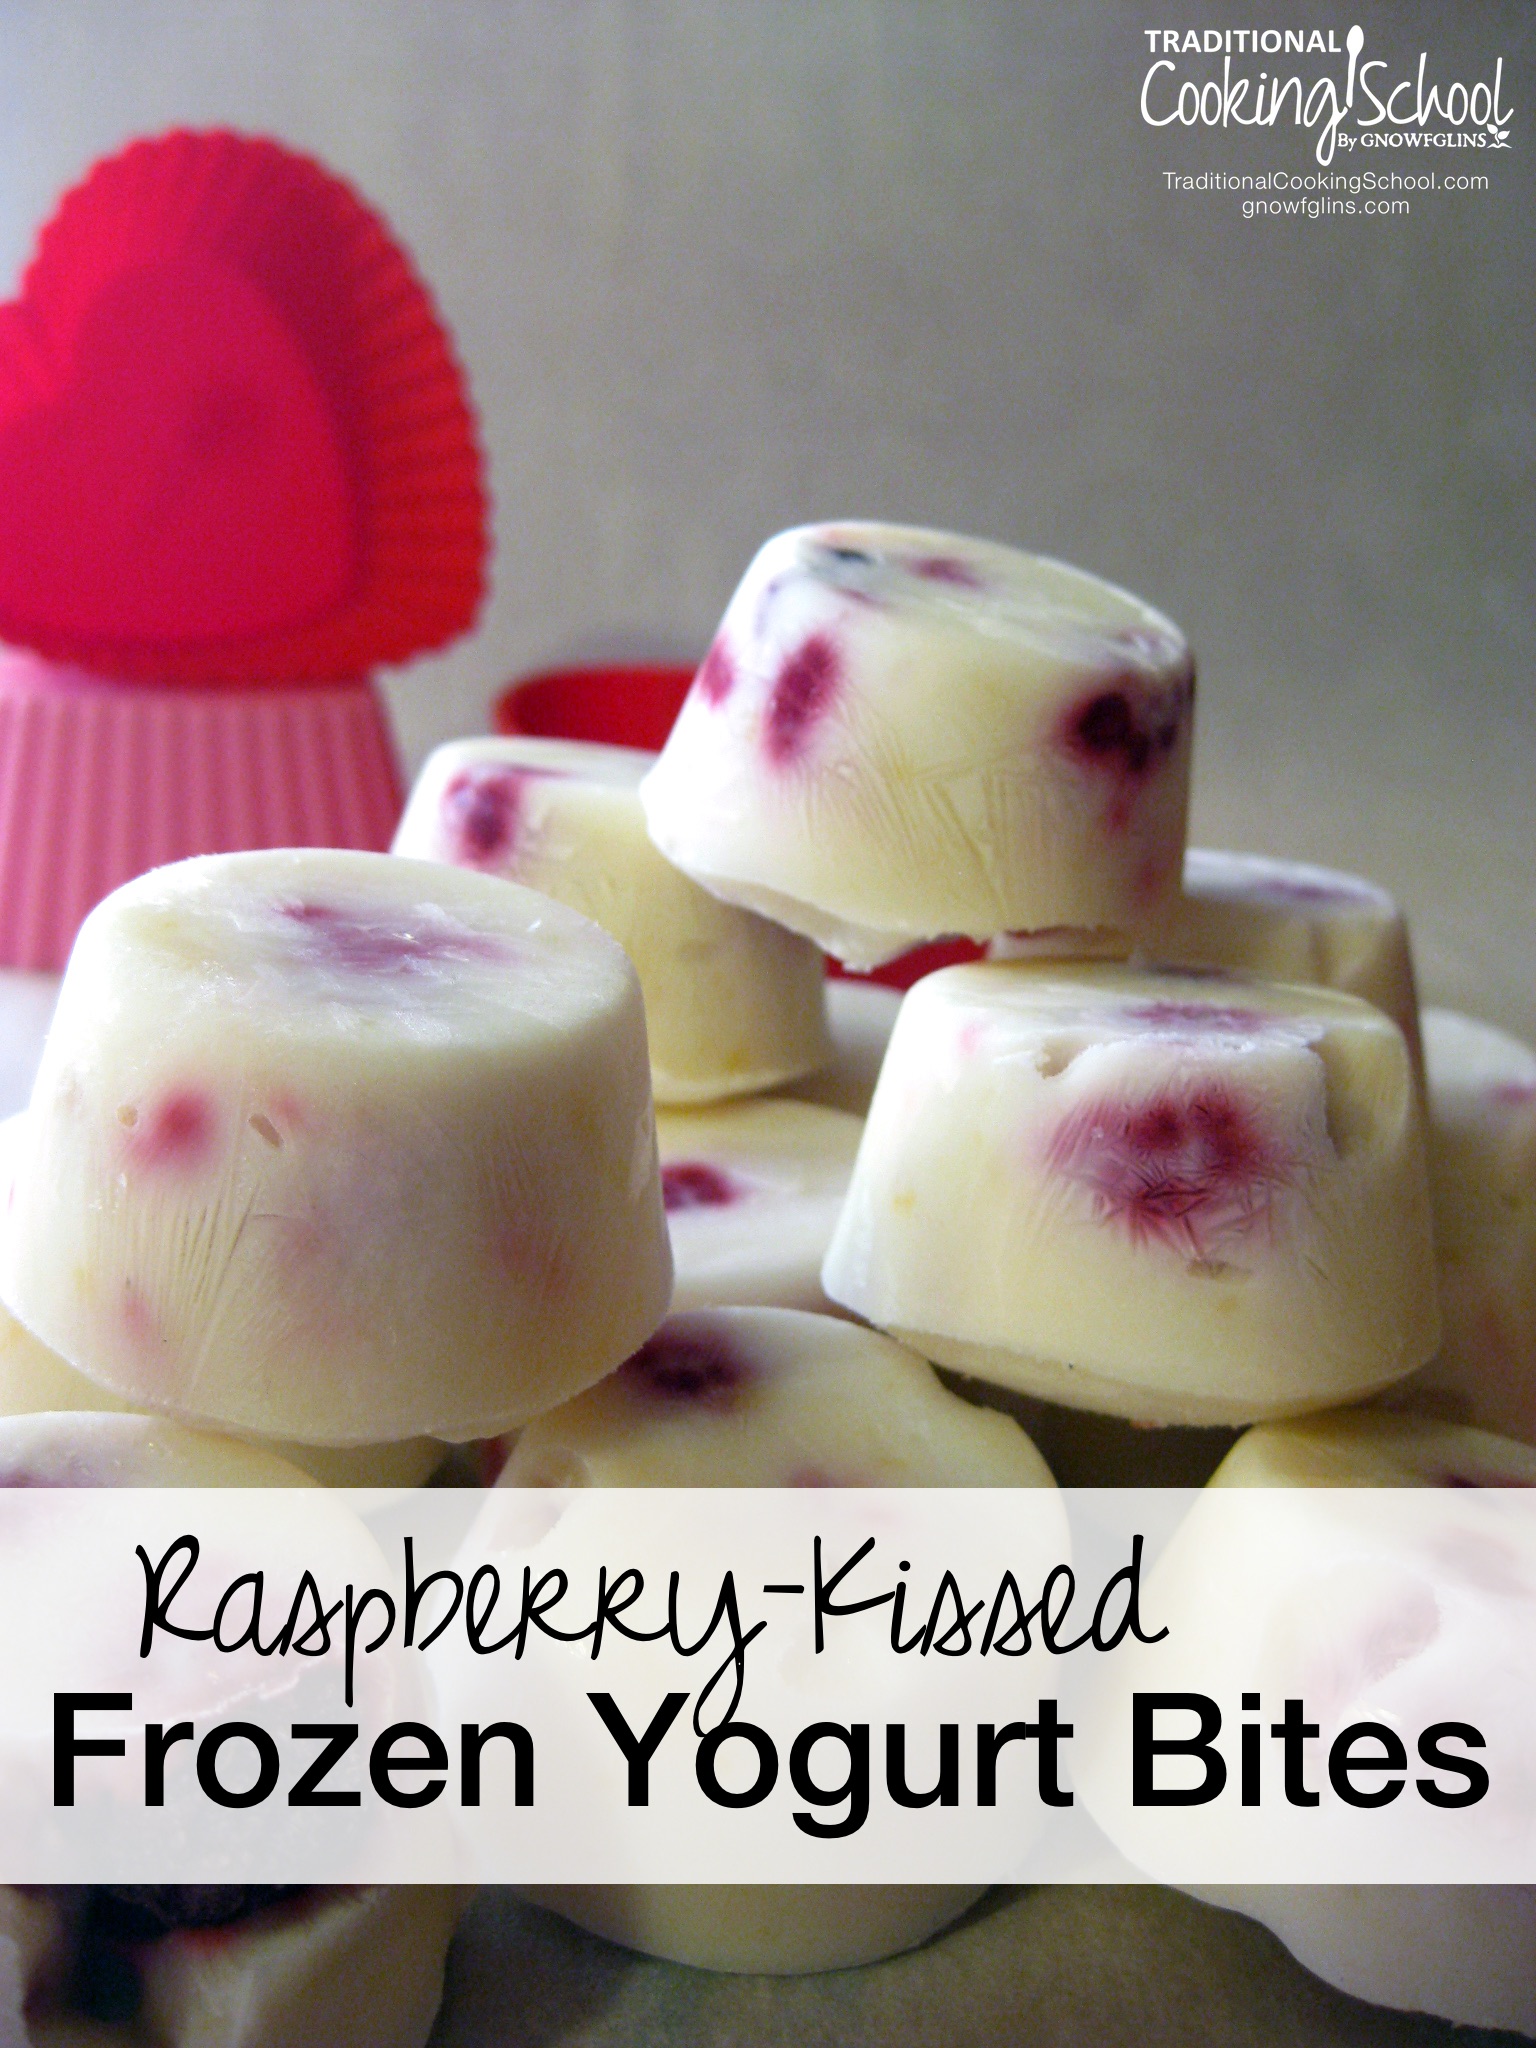 Raspberry-Kissed Frozen Yogurt Bites | Ever wish you had a cultured snack you could make in less than five minutes and have ready to grab whenever you wanted some serious snacking? These frozen yogurt bites are the true definition of both simple and satisfying. Thankfully, they are also both stunning and delicious, so sharing is highly encouraged. | TraditionalCookingSchool.com